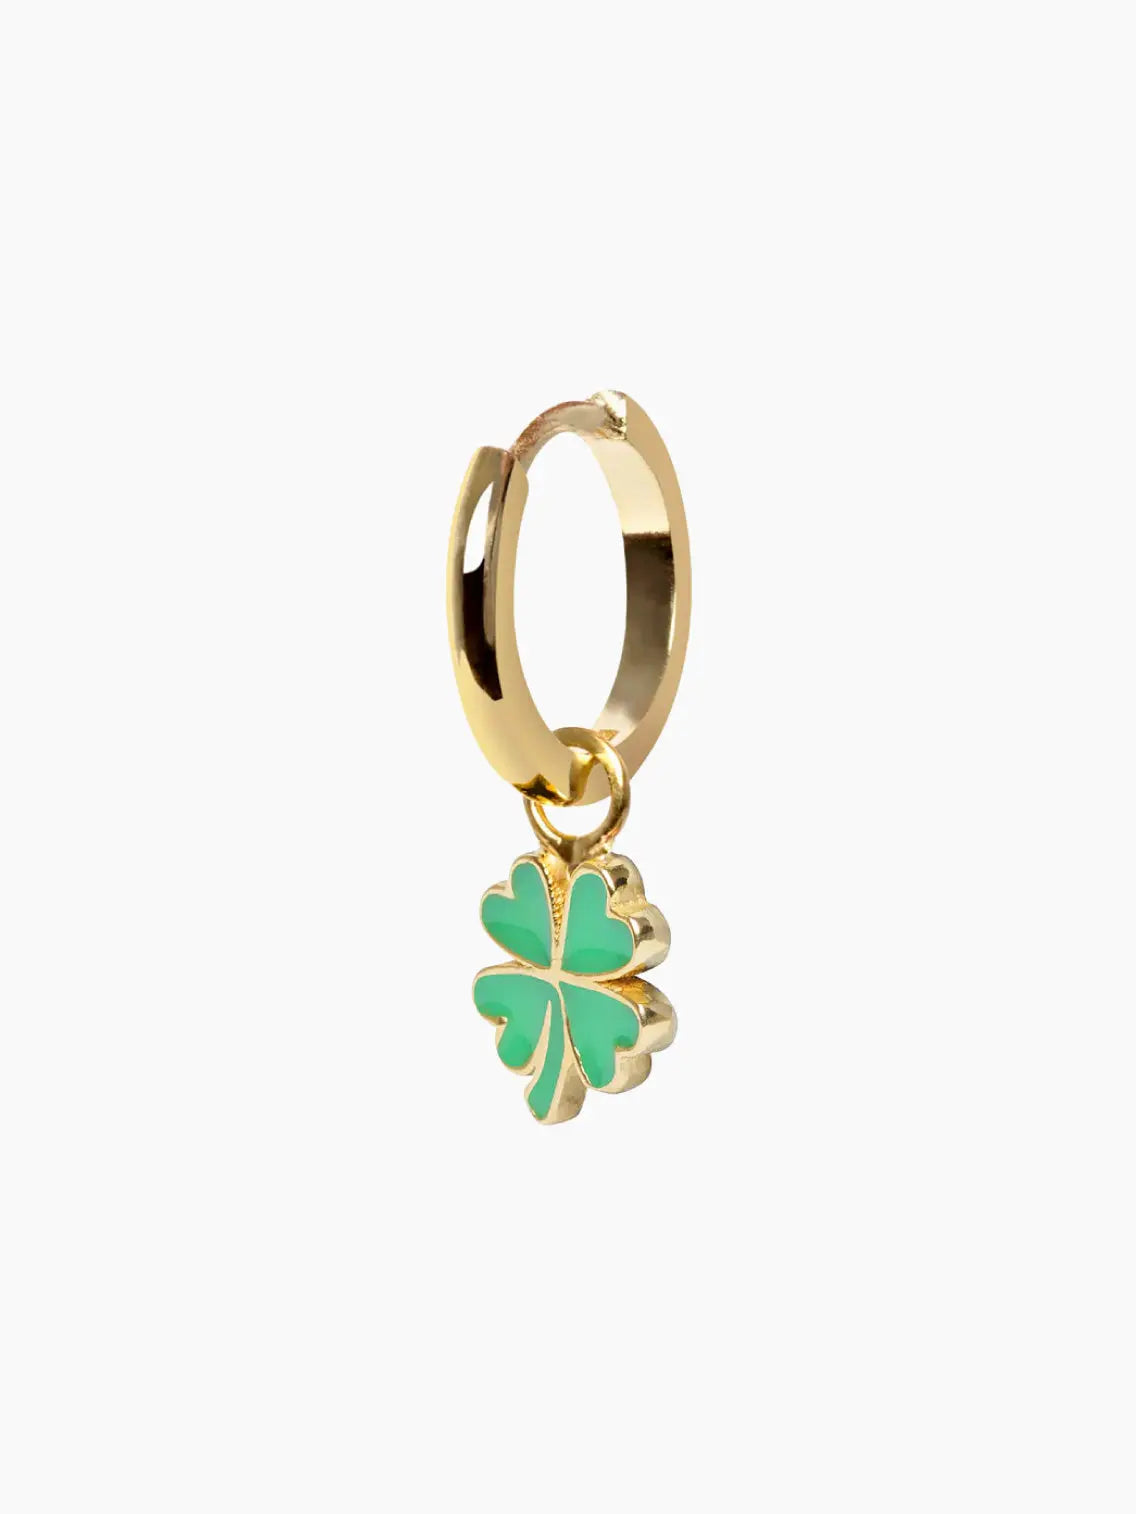 A close-up of a Gold Clover Earring with a dangling green four-leaf clover charm by Wilhelmina Garcia. The earring has a polished finish and the clover charm adds a touch of color. Found exclusively at Bassalstore in Barcelona, the plain white background makes the earring stand out beautifully.